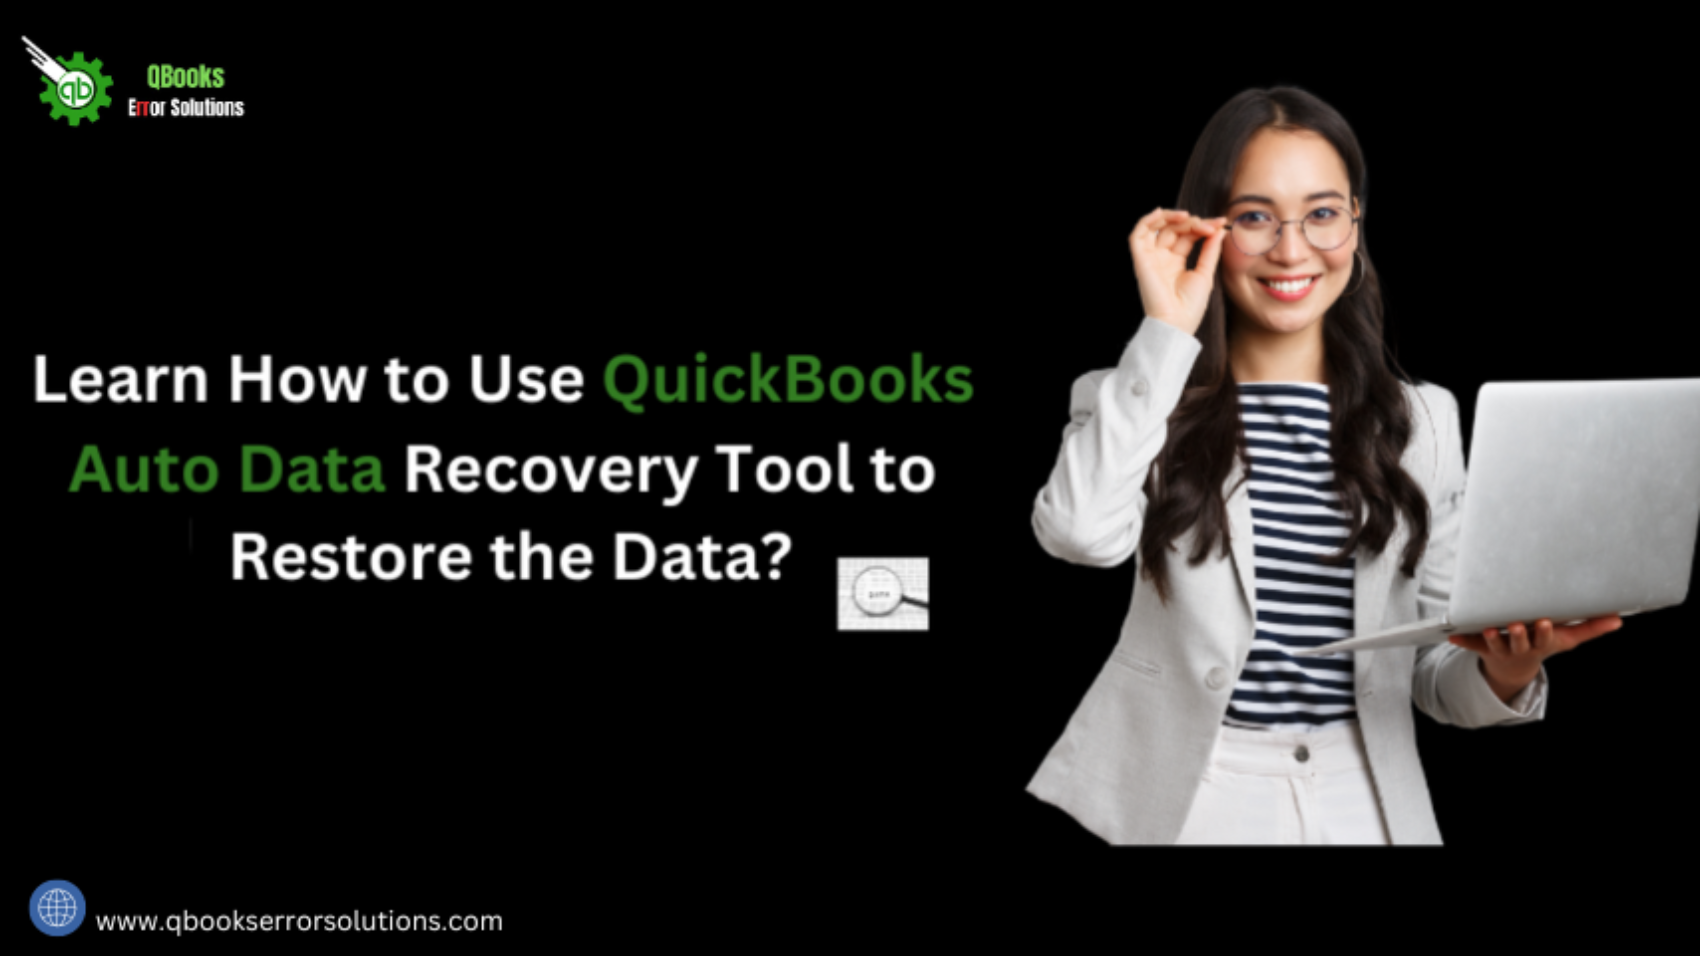 Recover-Lost-Data-from-QuickBooks-Auto-Data-Recovery-Tool